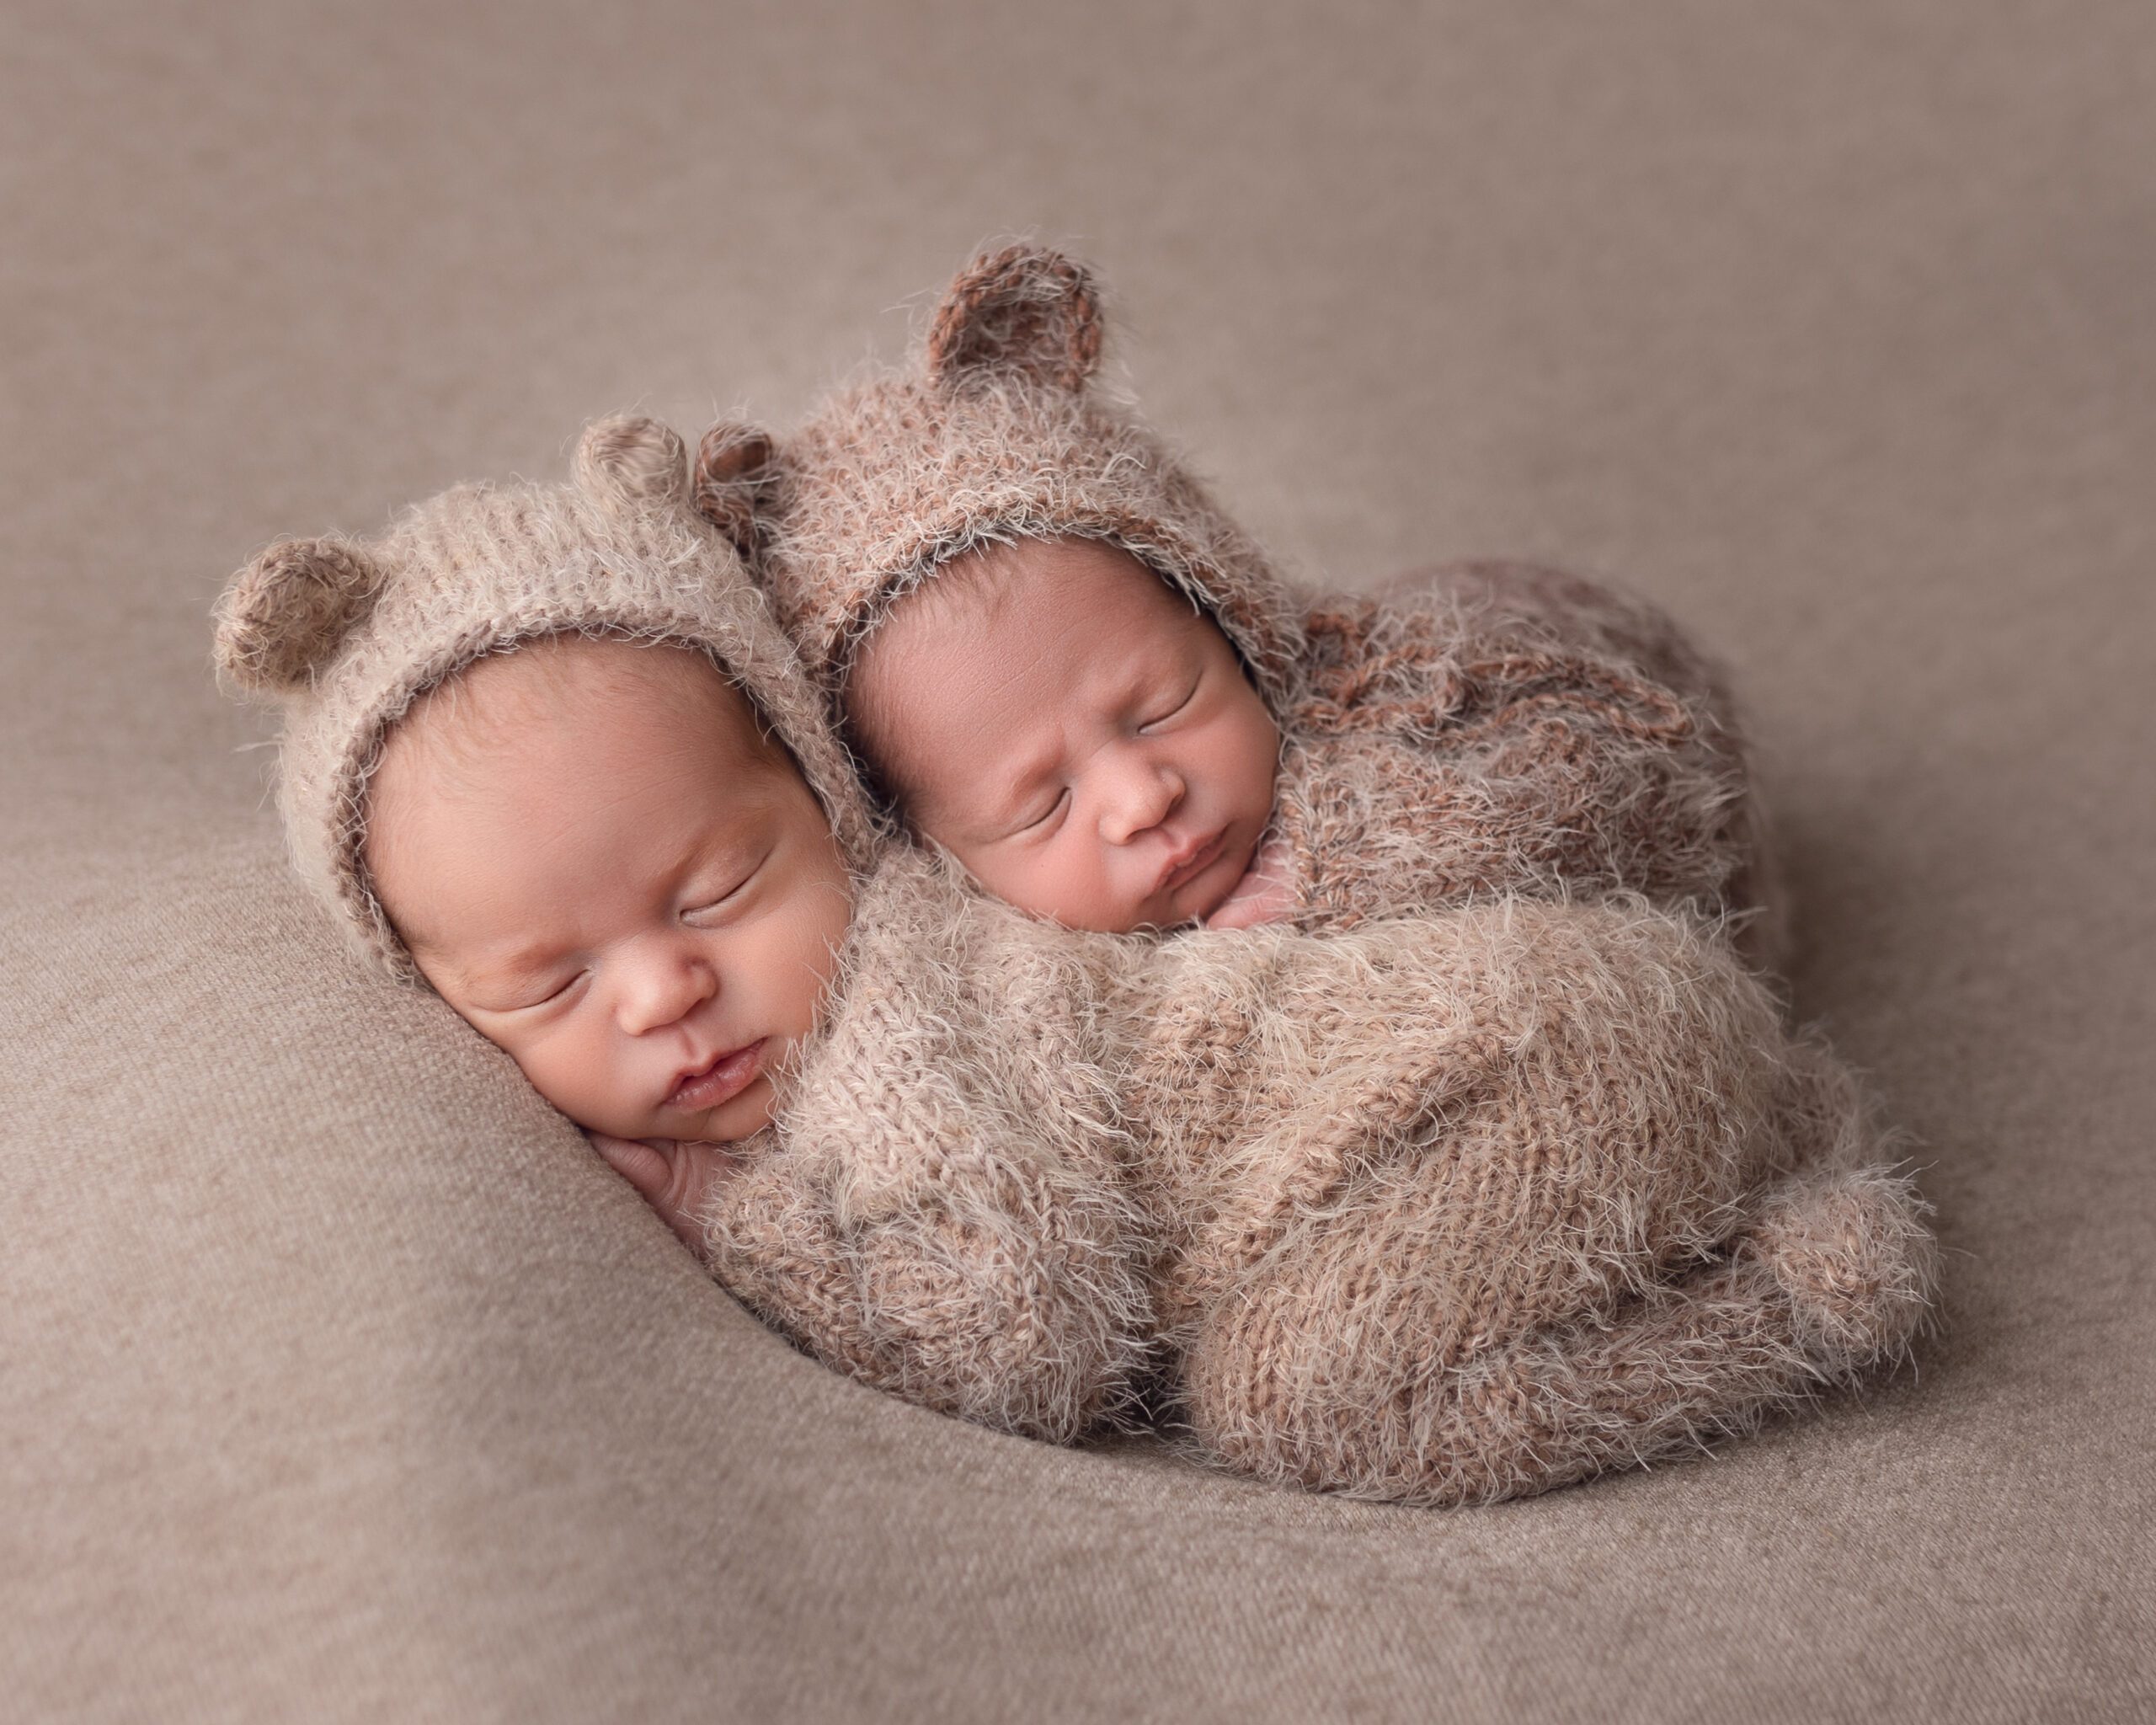 twin baby care tips in blog photo of newborn twins